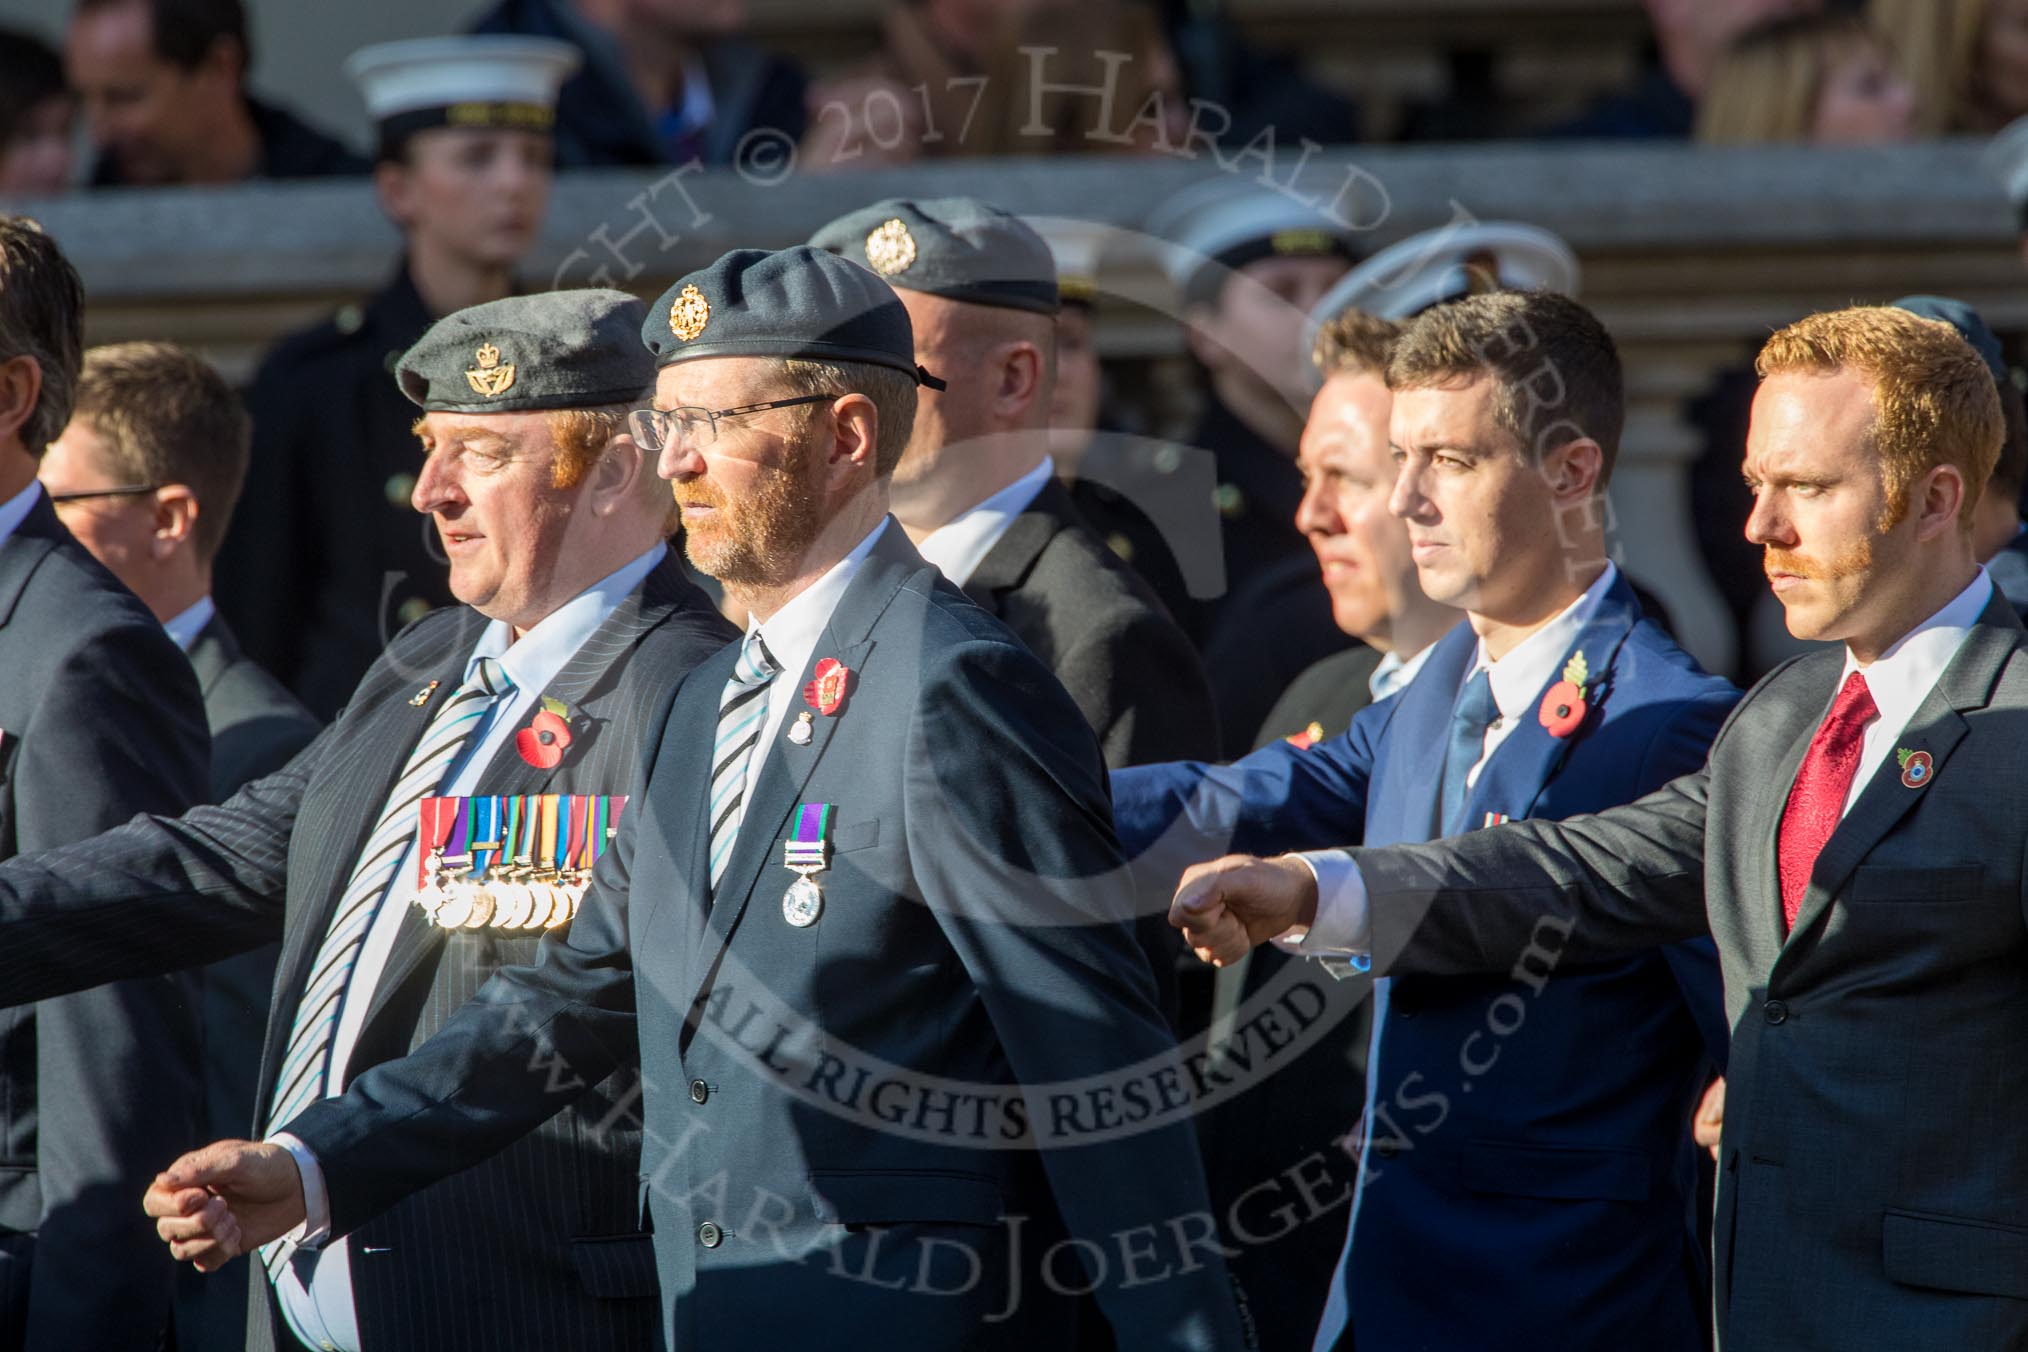 7 Squadron Association (Group C8, 20 members) during the Royal British Legion March Past on Remembrance Sunday at the Cenotaph, Whitehall, Westminster, London, 11 November 2018, 12:15.